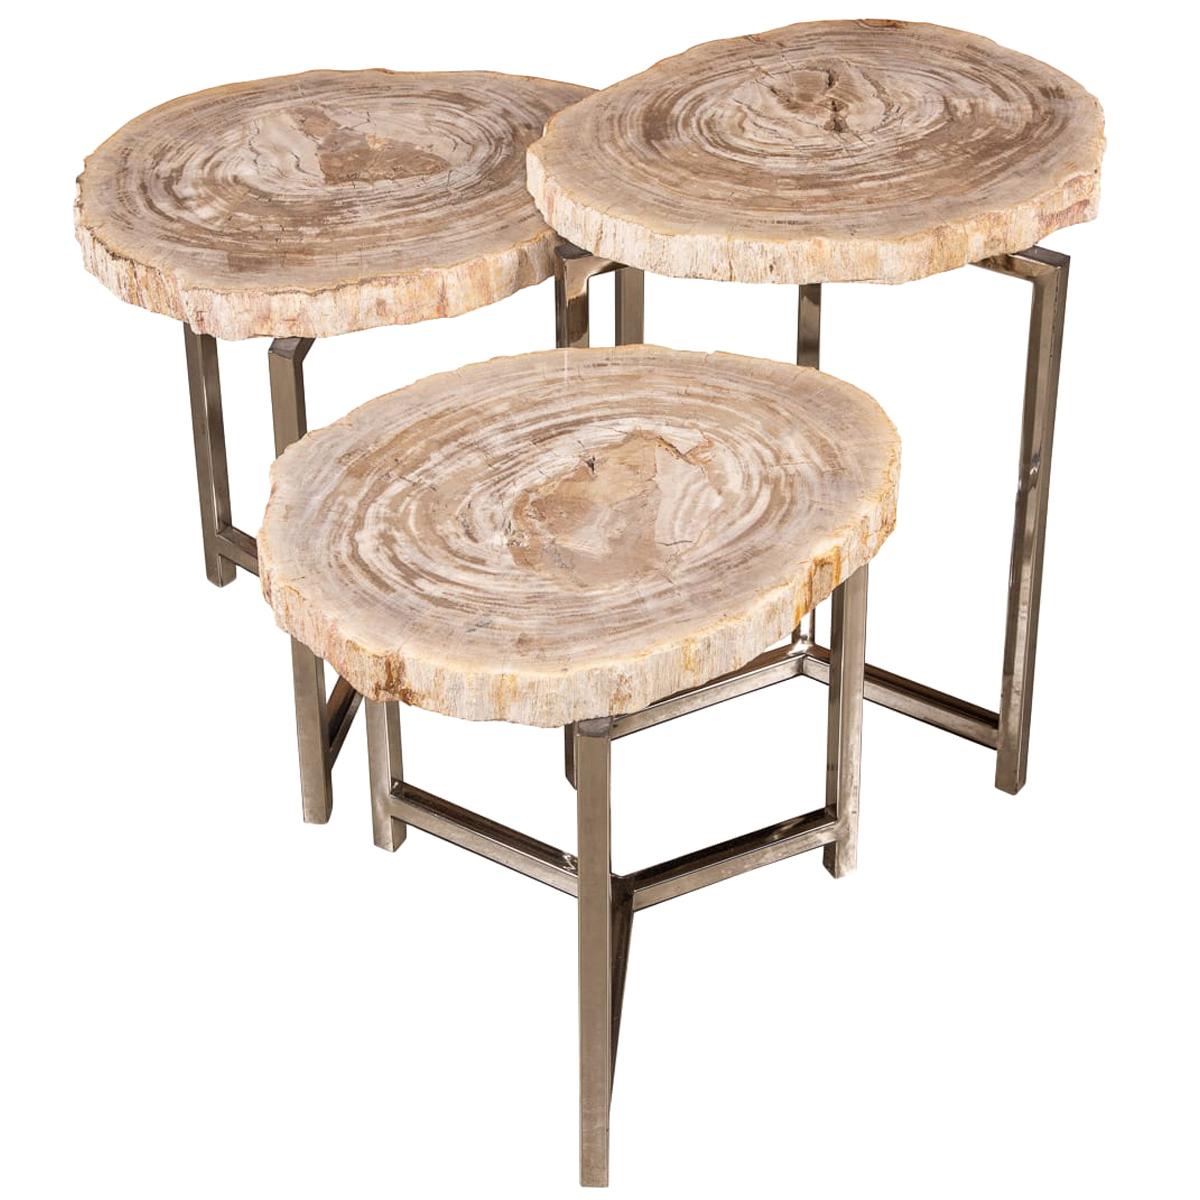 Nest of Three Petrified Wood 'Fossil' Tables on Chrome Bases